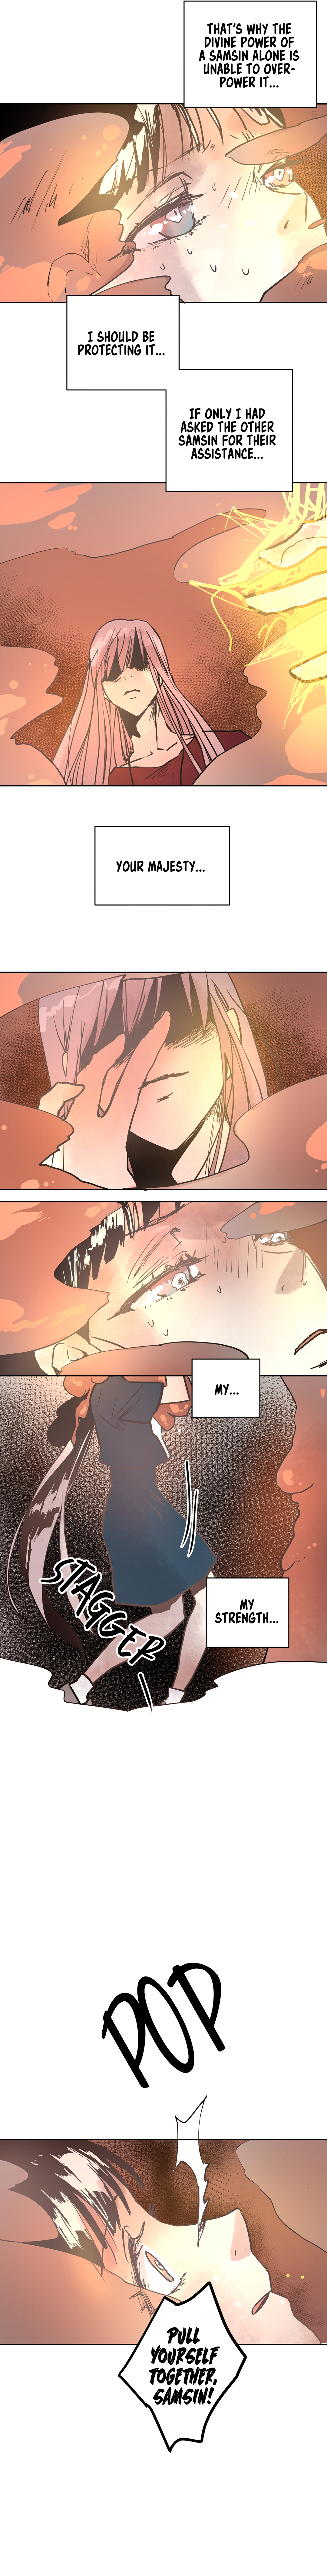 Mine and Samsin’s Horrormance Chapter 10 - Page 2